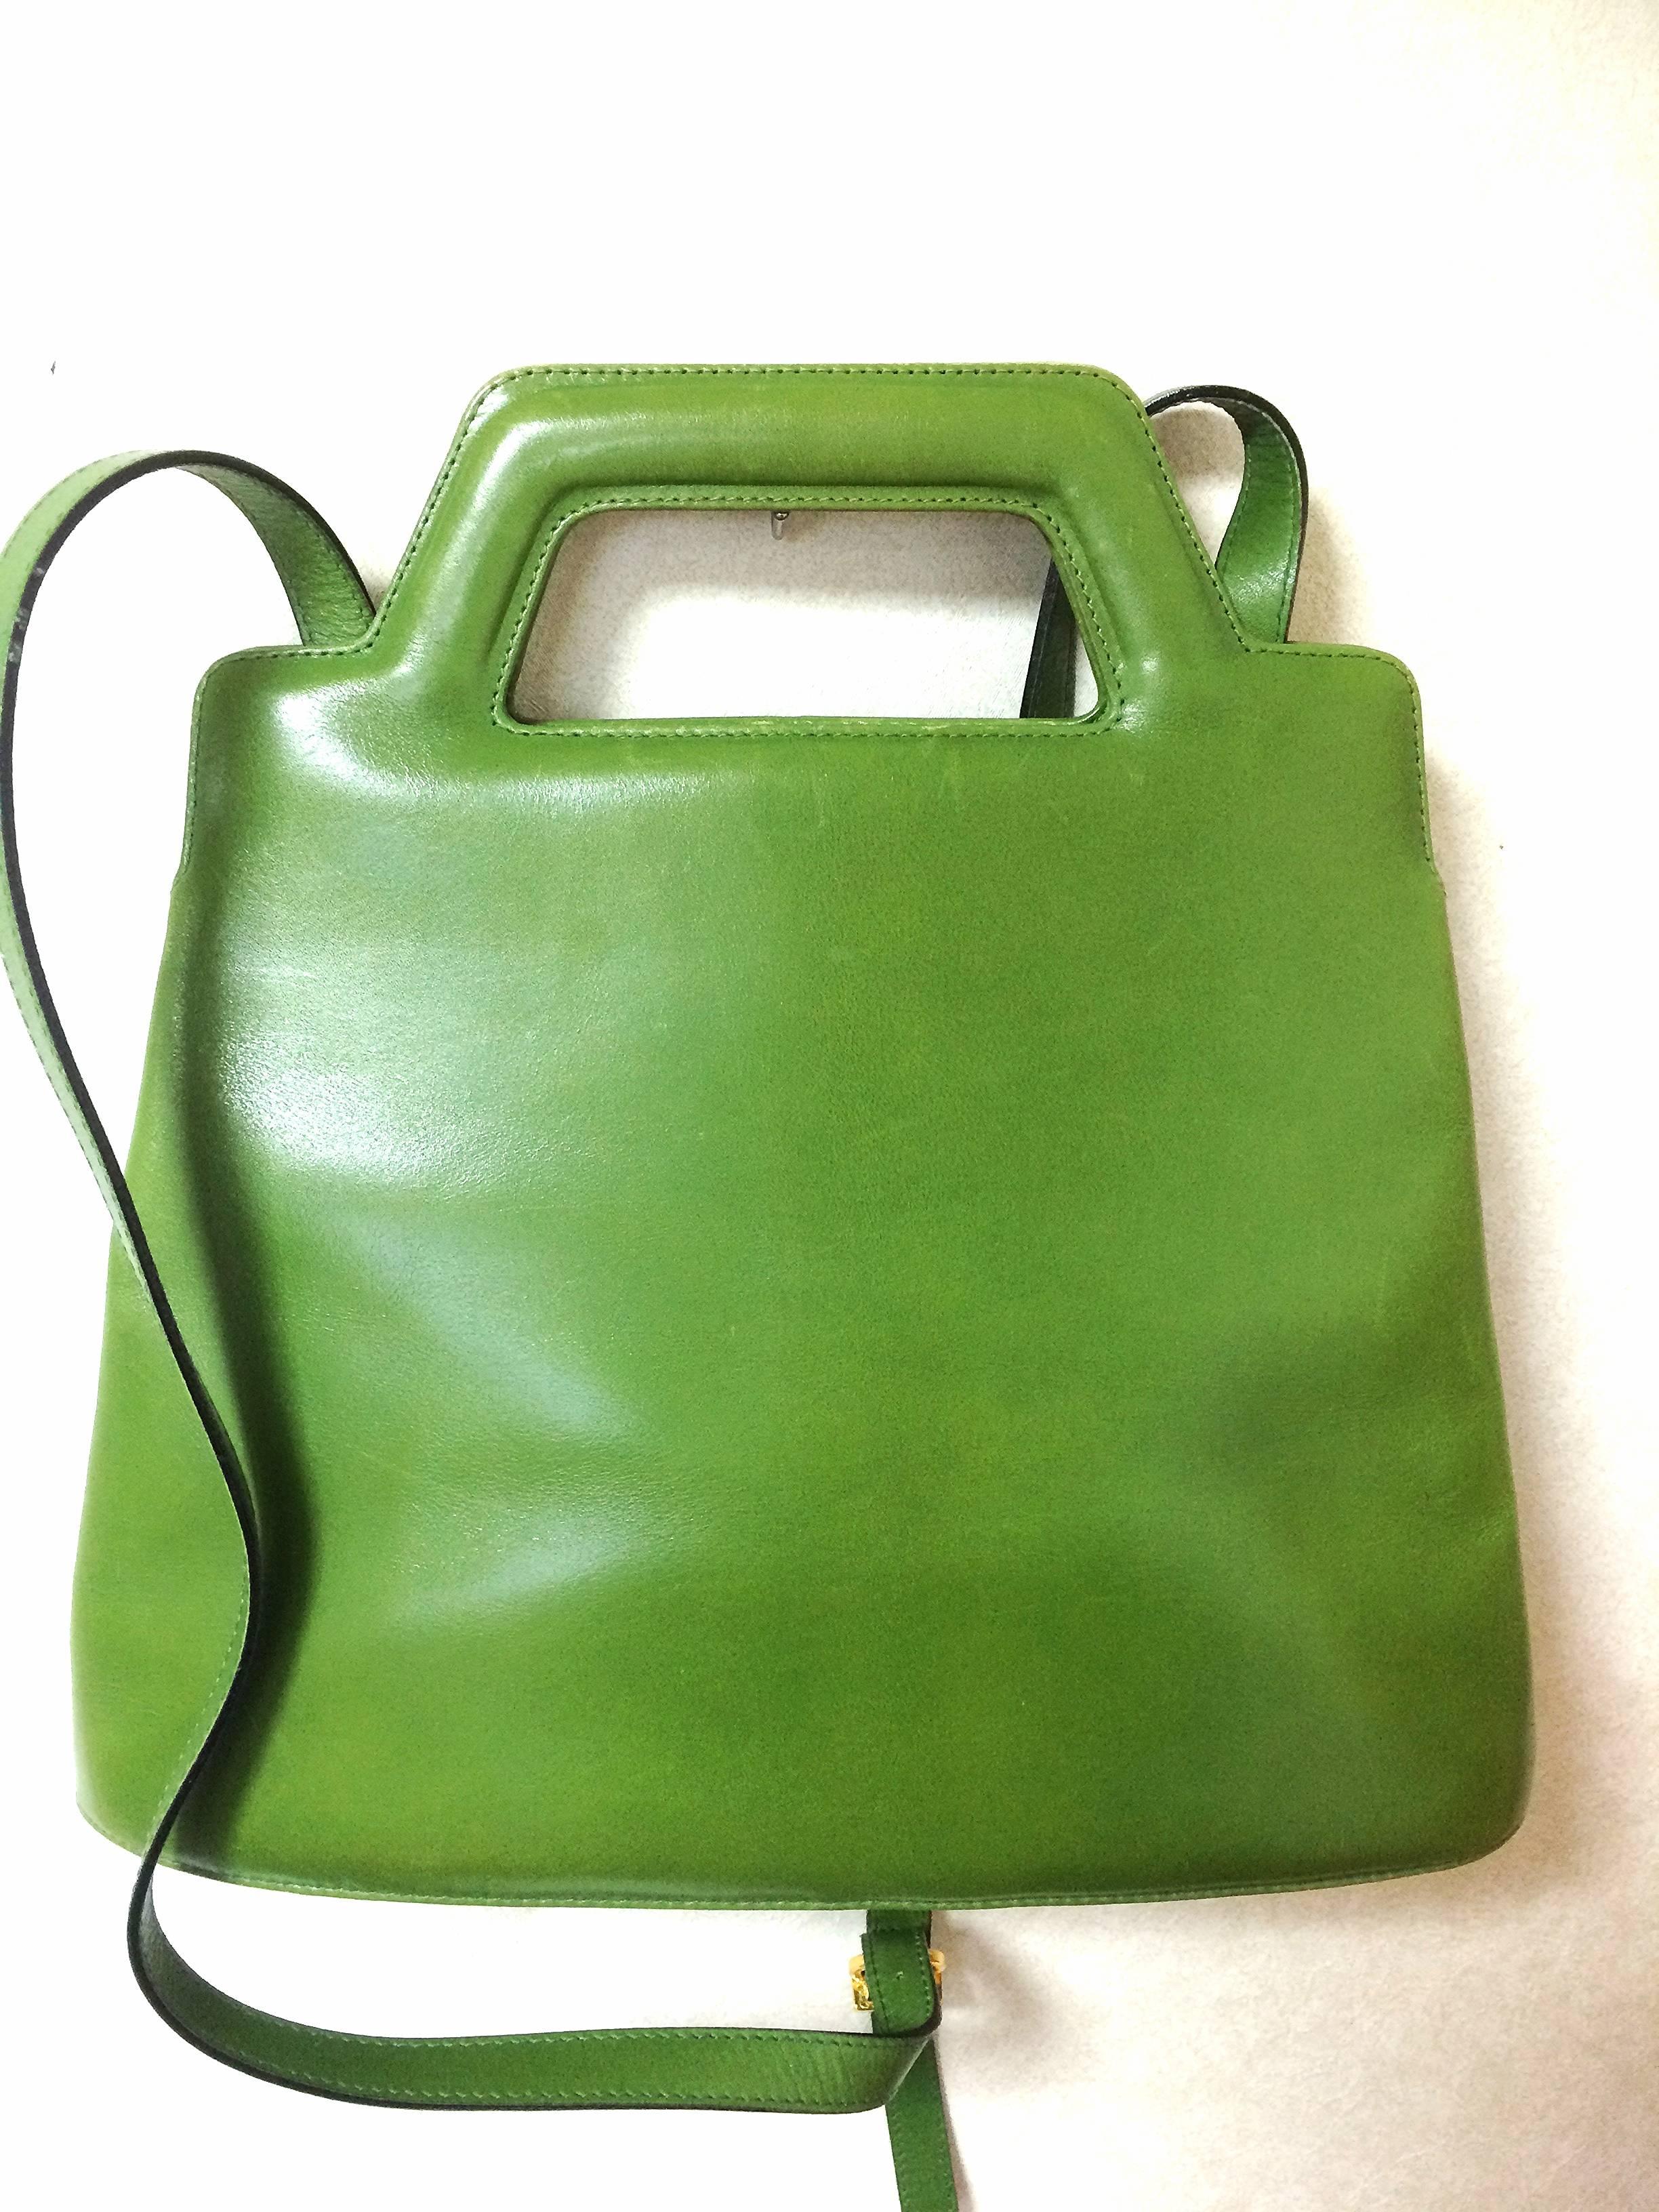 1990s. Vintage Salvatore Ferragamo green leather golden gancini trapezoid shape handbag with shoulder strap.

Here is another fabulous bag from Salvatore Ferragamo back in the 90's gancini collection.
Beautiful green leather purse. 

You can